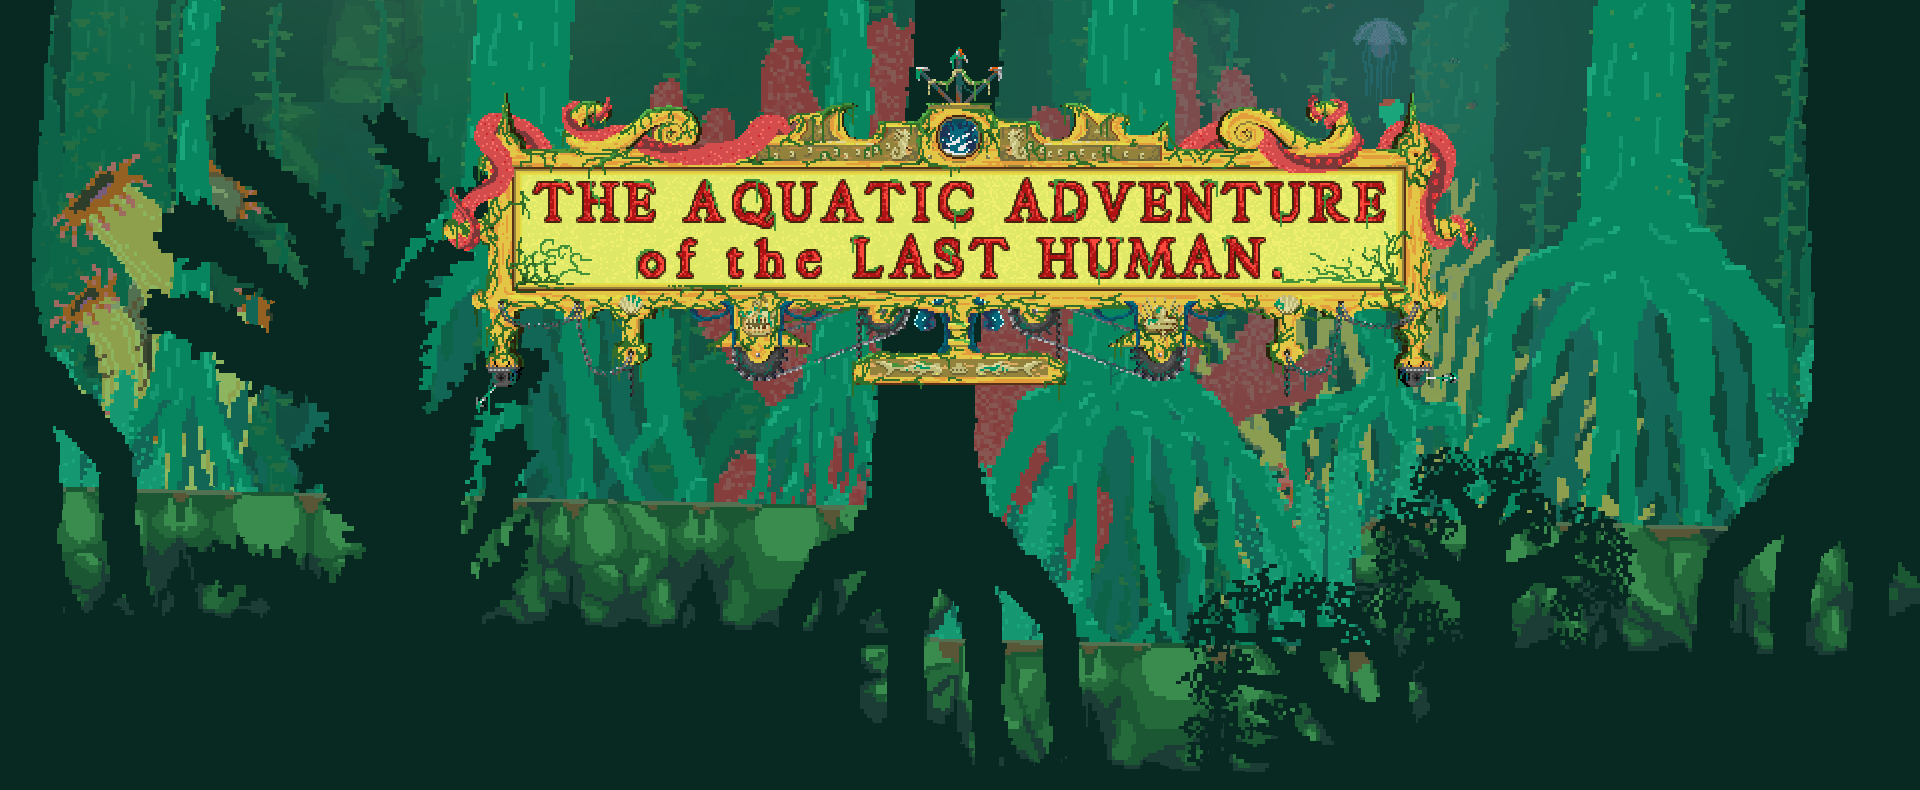 The Aquatic Adventure of the Last Human Review